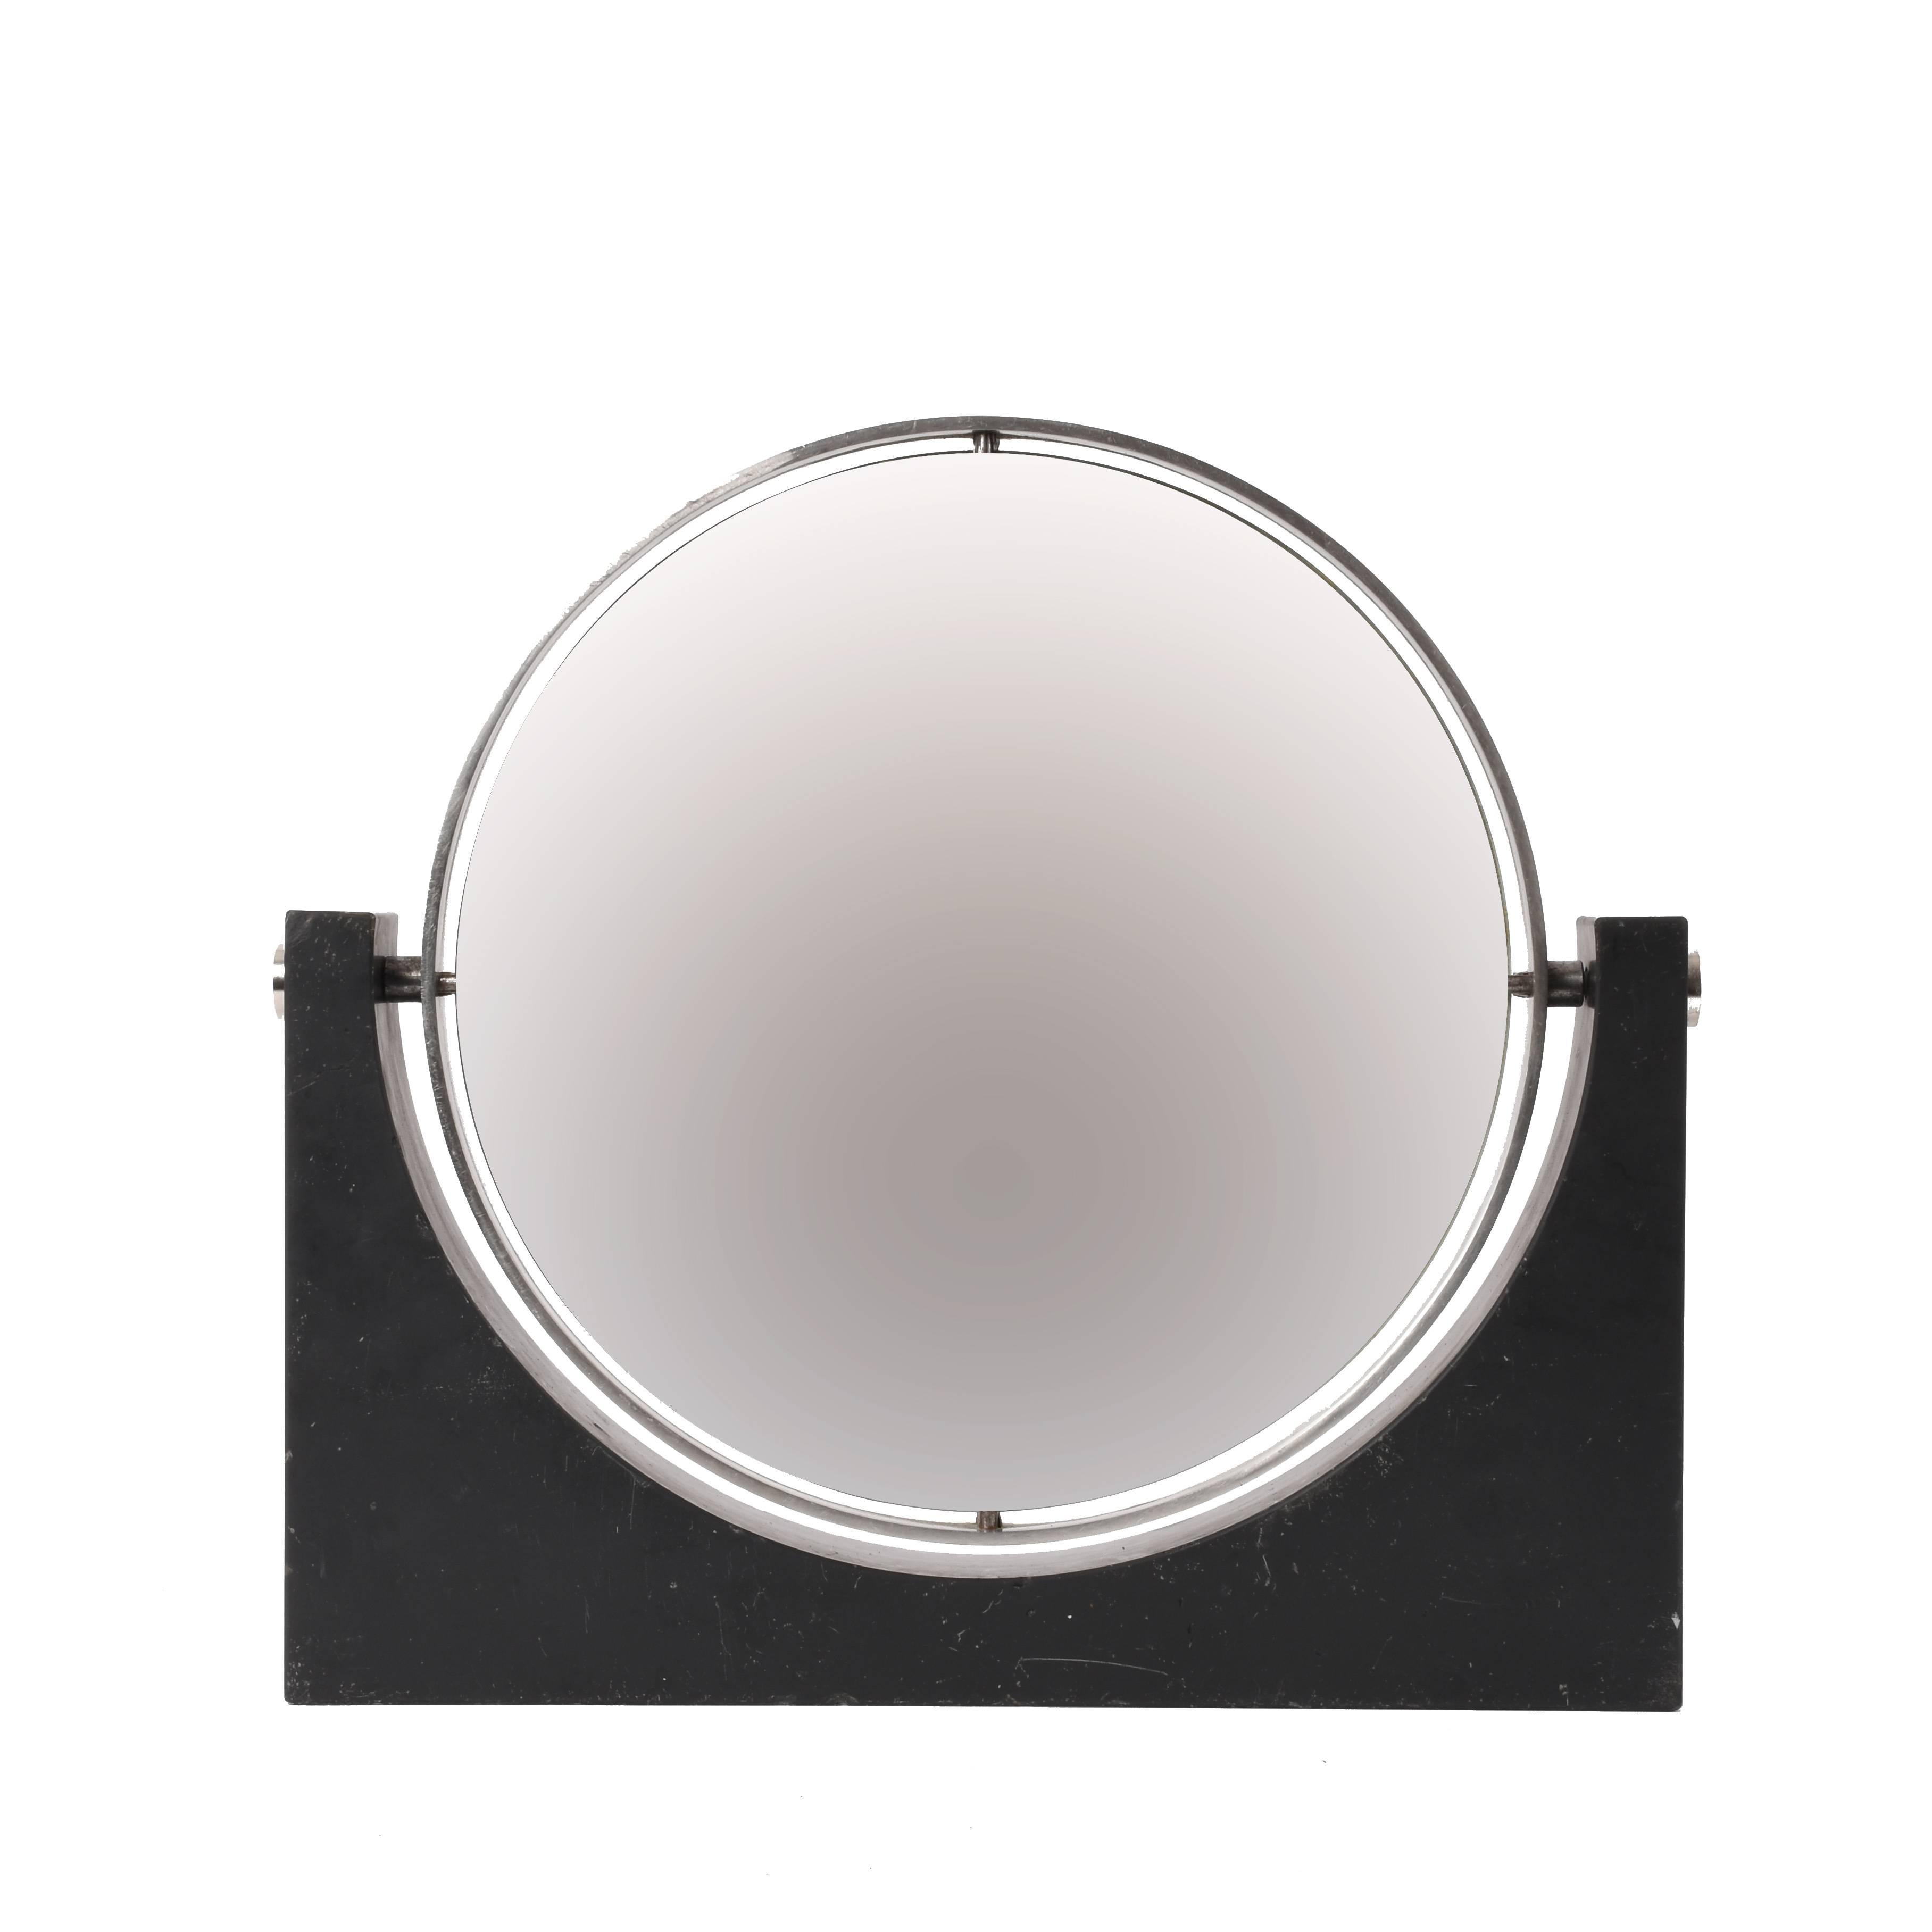 Mid-20th Century Angelo Mangiarotti Midcentury Marble and Steel Round Vanity Table Mirror, 1960s For Sale